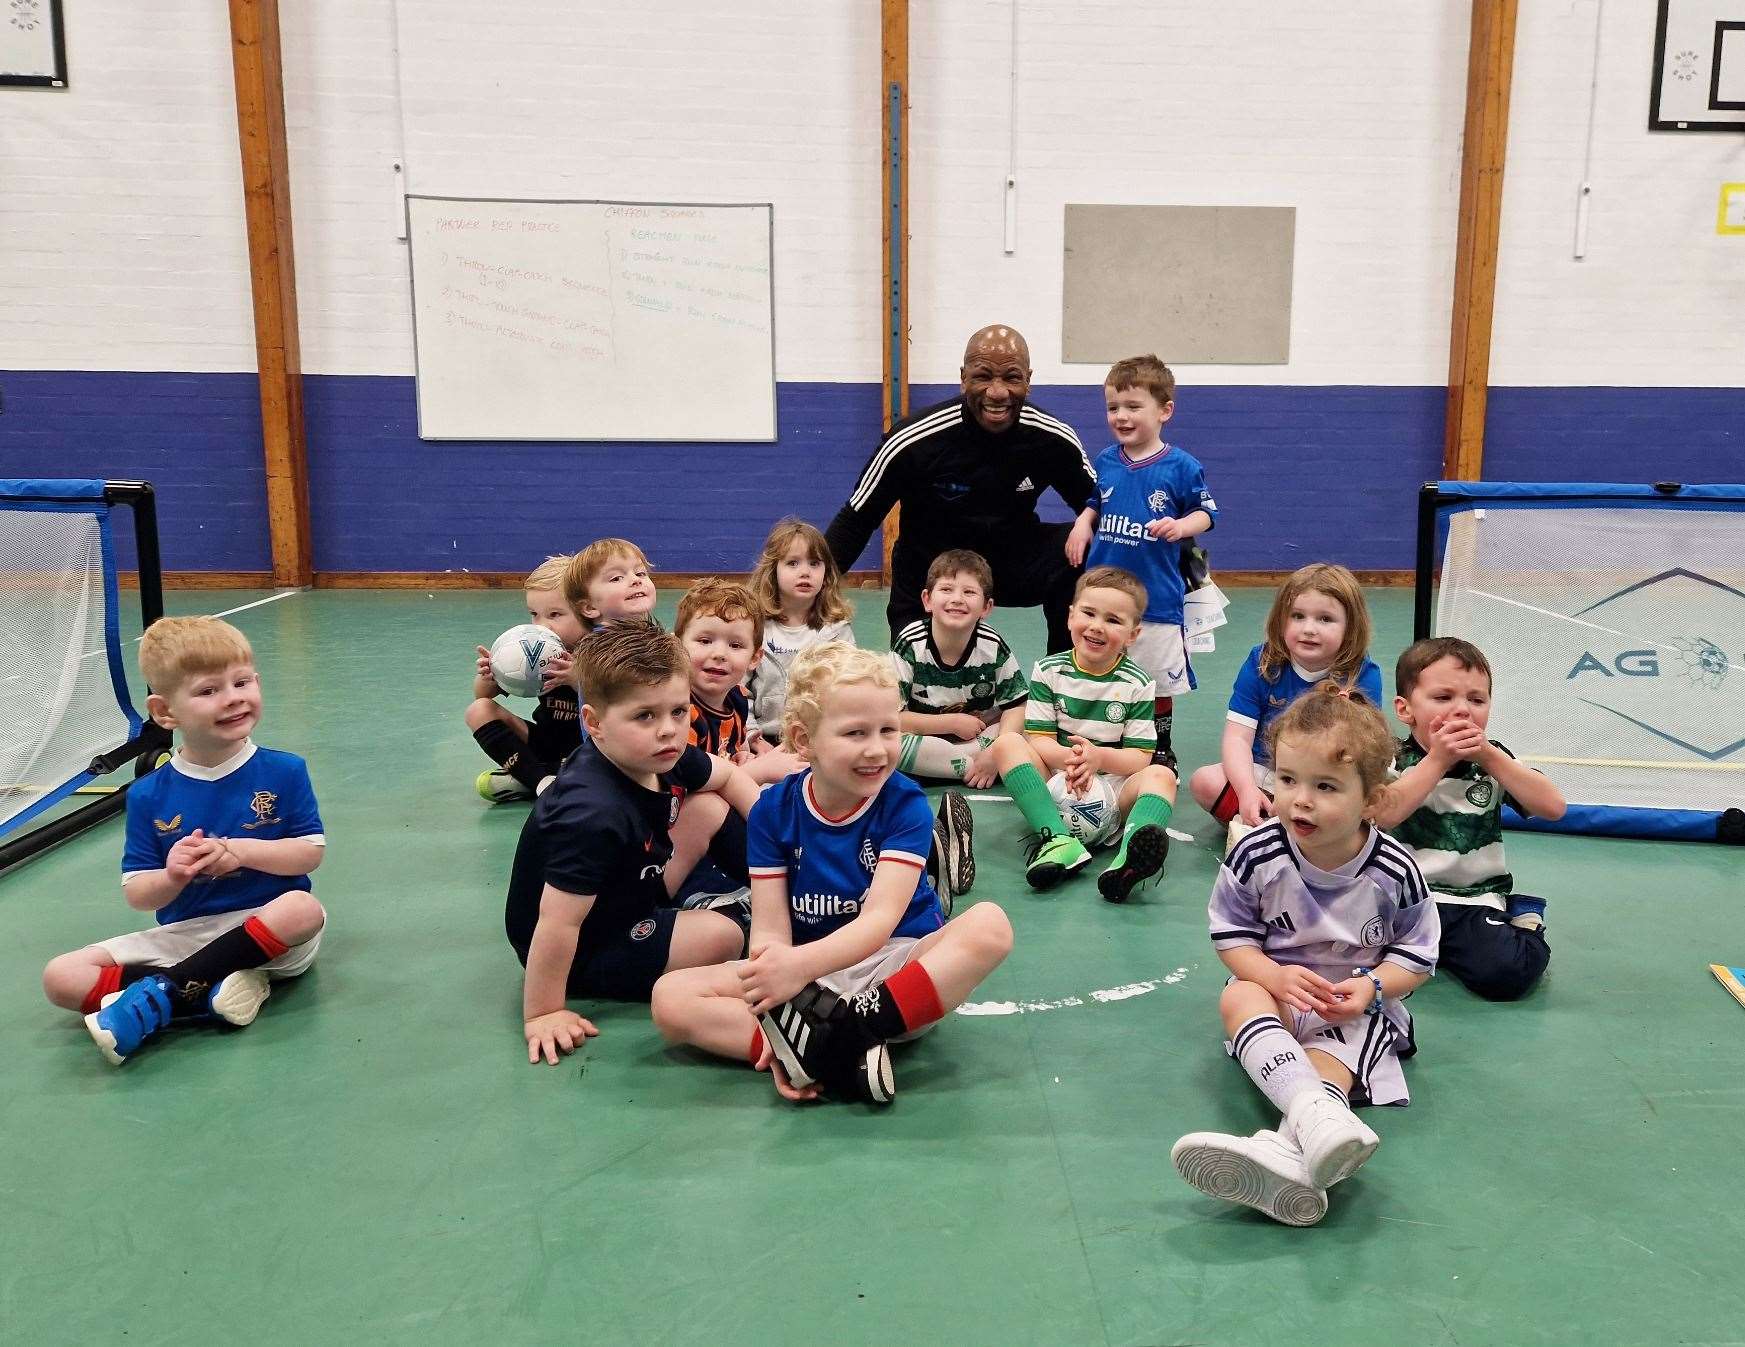 Marvin Andrews with some of the kids at a session run by AG Coaching.